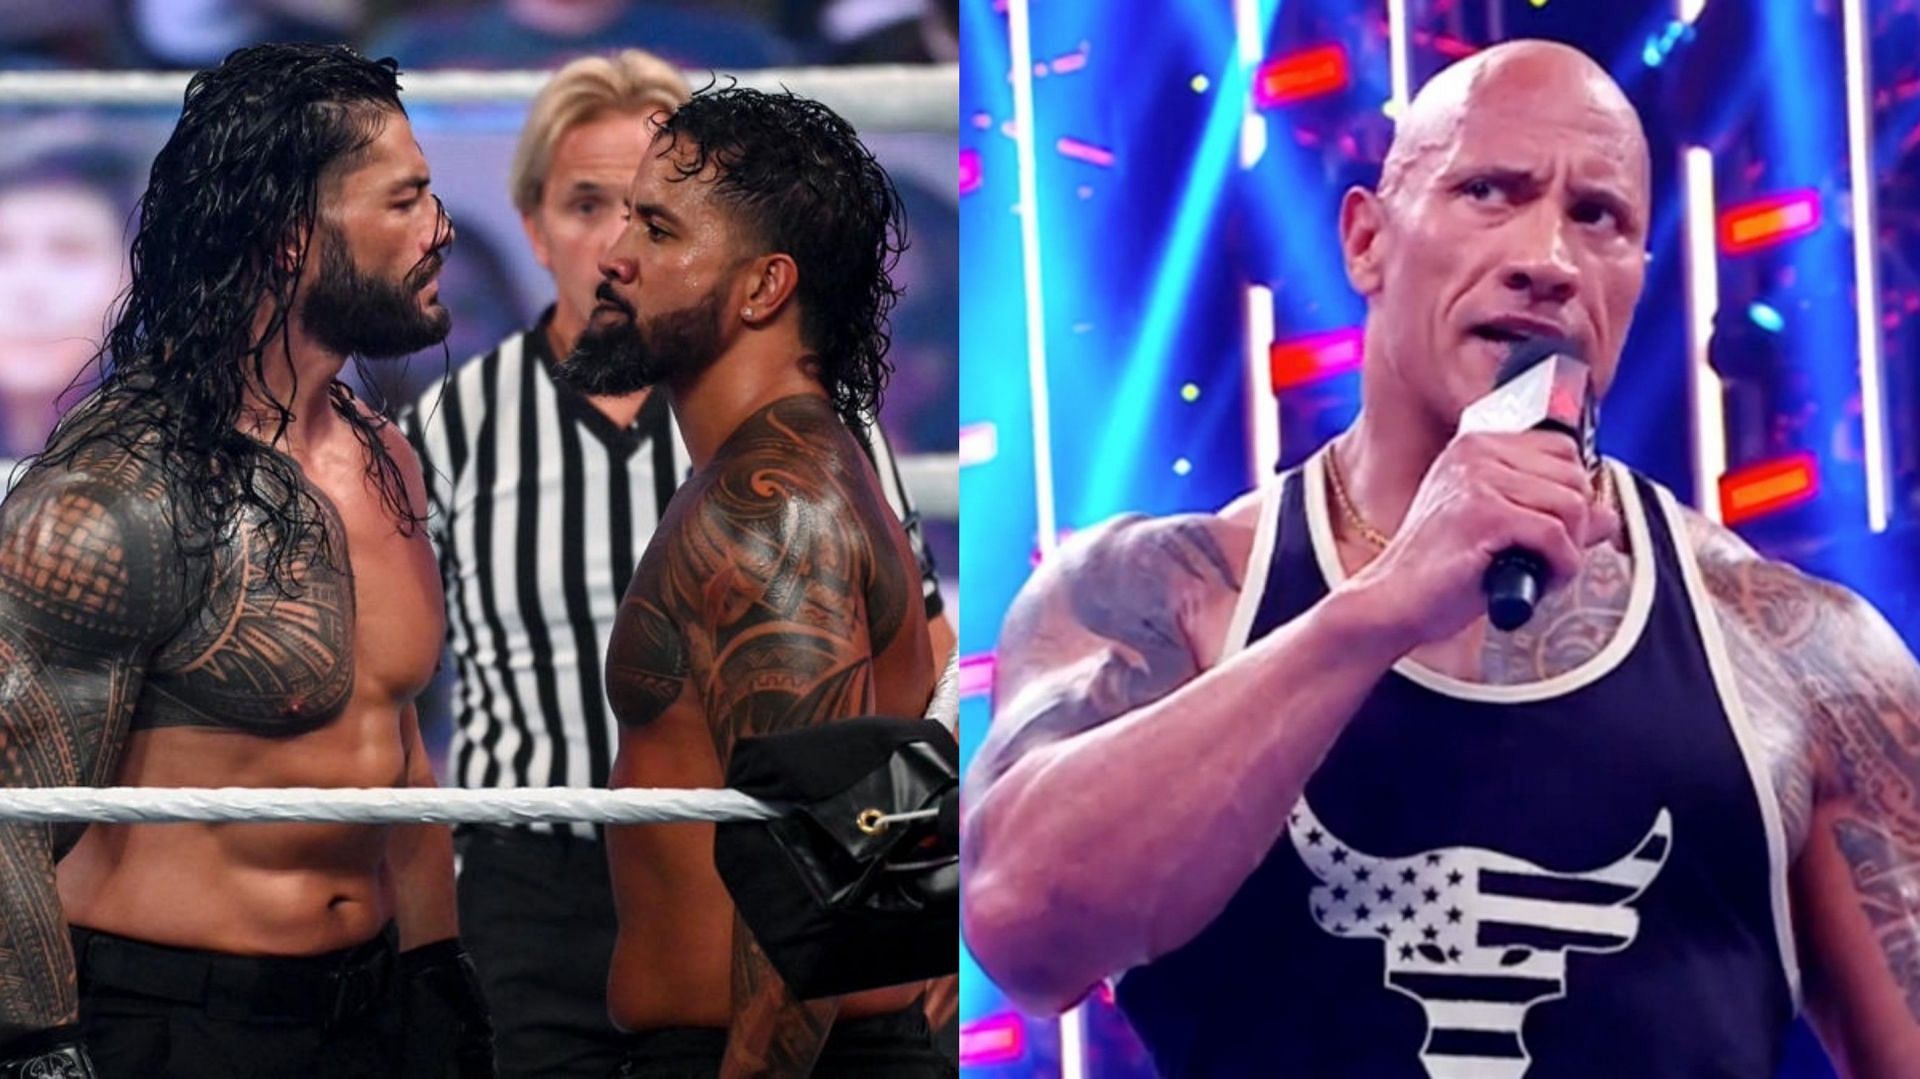 Jey Uso had a few words for Roman Reigns vs. The Rock